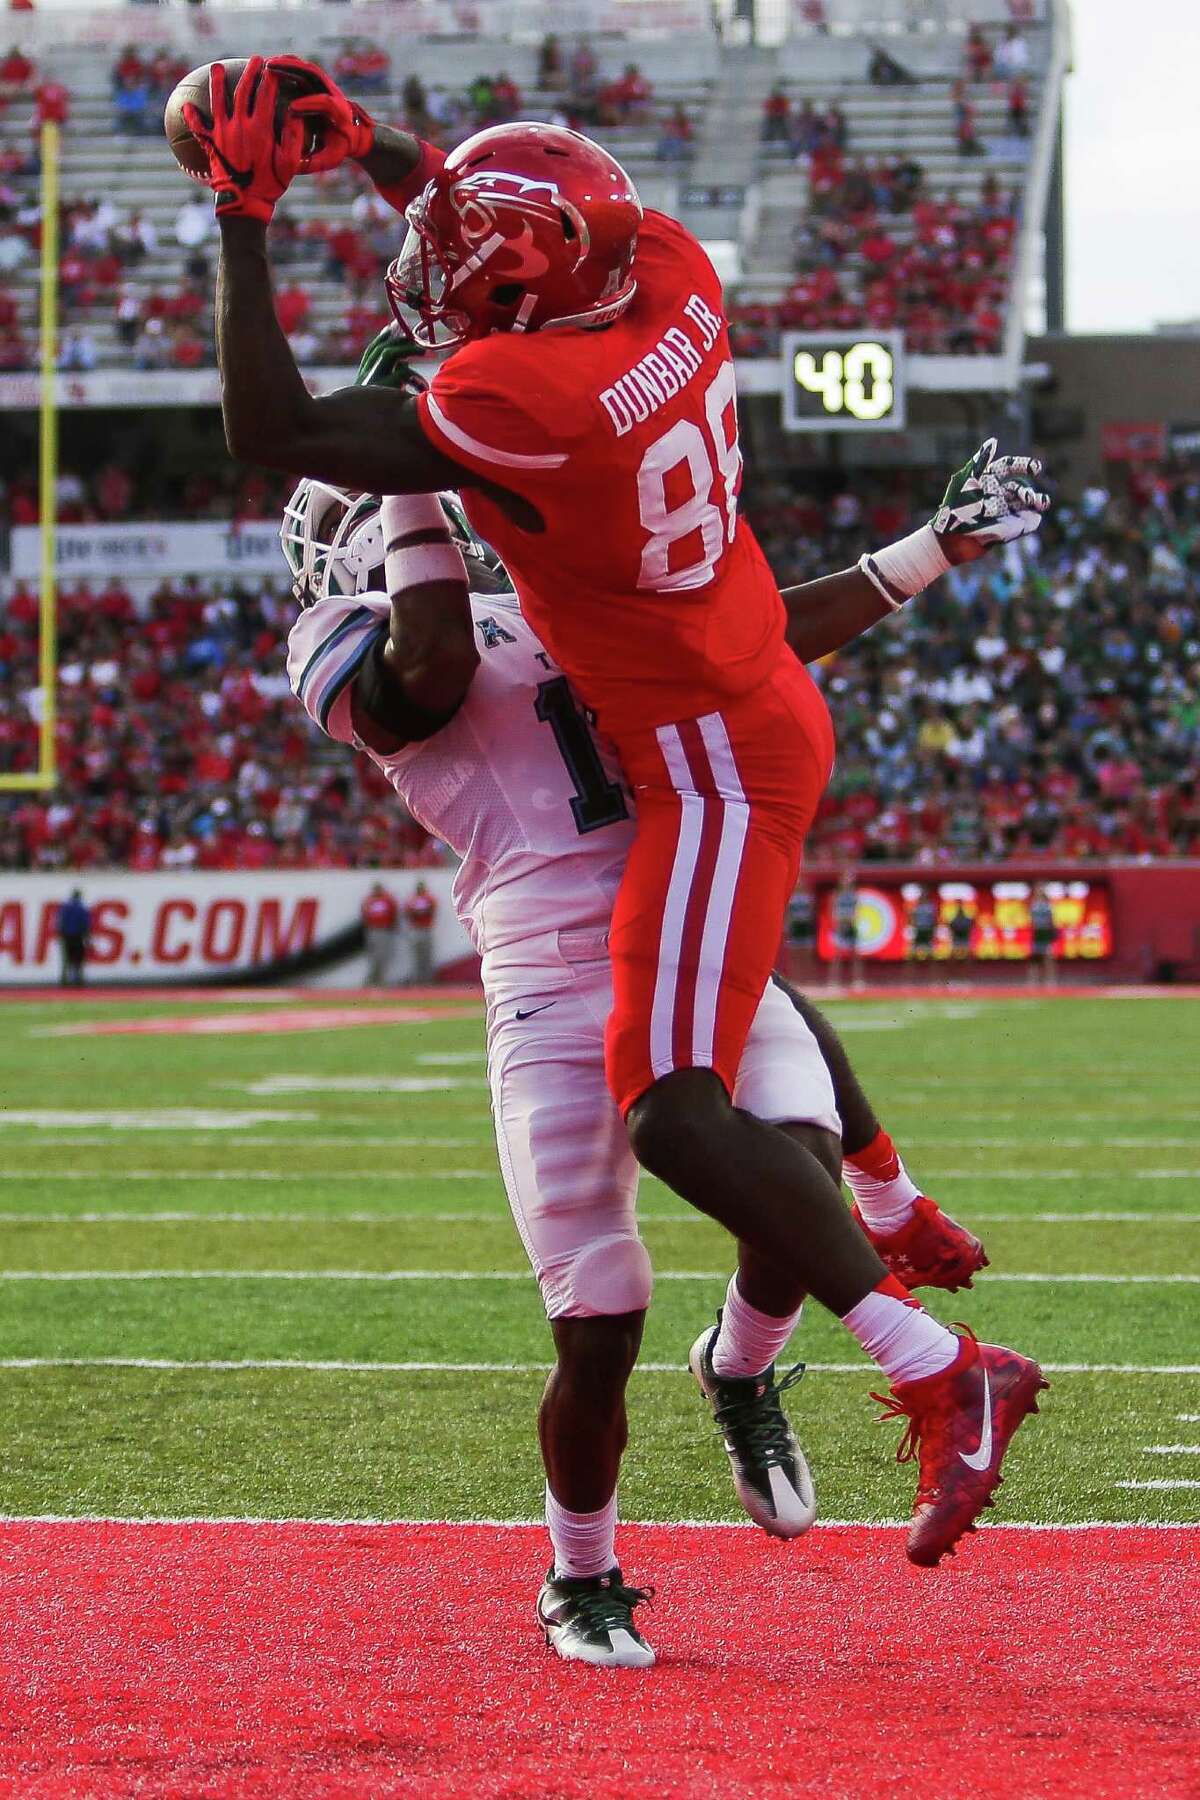 Houston Cougars wide receiver Steven Dunbar (88) catches a touchdown pass over Tulane Green Wave defensive back P.J. Hall (16) as the Houston Cougars take on the Tulane Green Wave at TDECU Stadium Saturday, Nov. 12, 2016 in Houston.